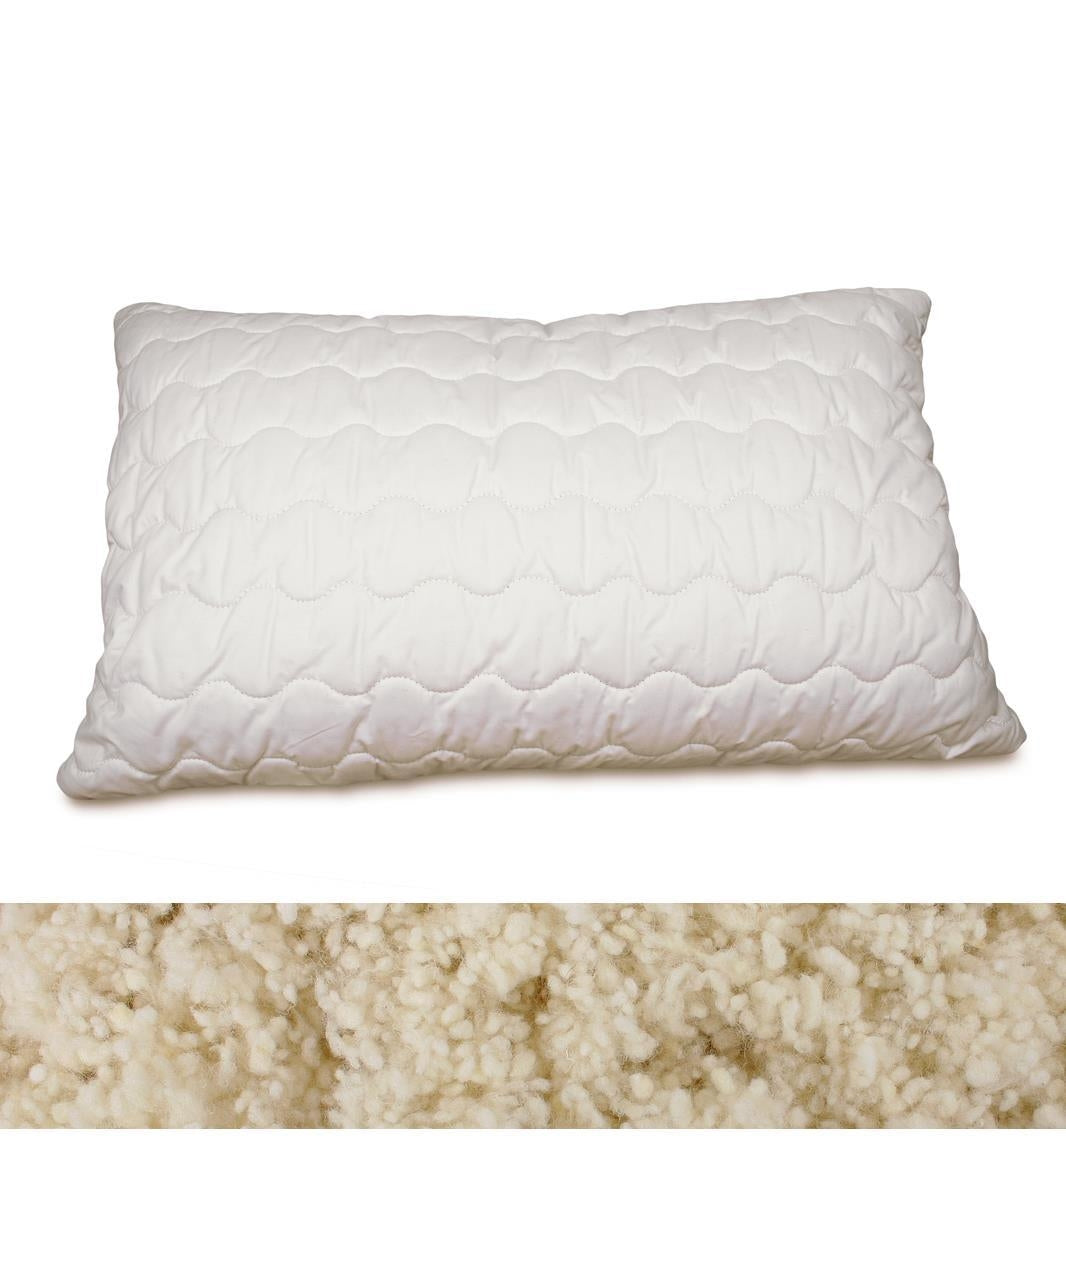 Organic Wool Quilted Small Pillow (40cm x 60cm) | Greenfibres | Raw Living UK | House &amp; Home | Bedding | Greenfibres Quilted Small Organic Wool Pillow (40cm x 60cm): wool is an excellent temperature &amp; moisture regulator, ensuring comfort &amp; balance.